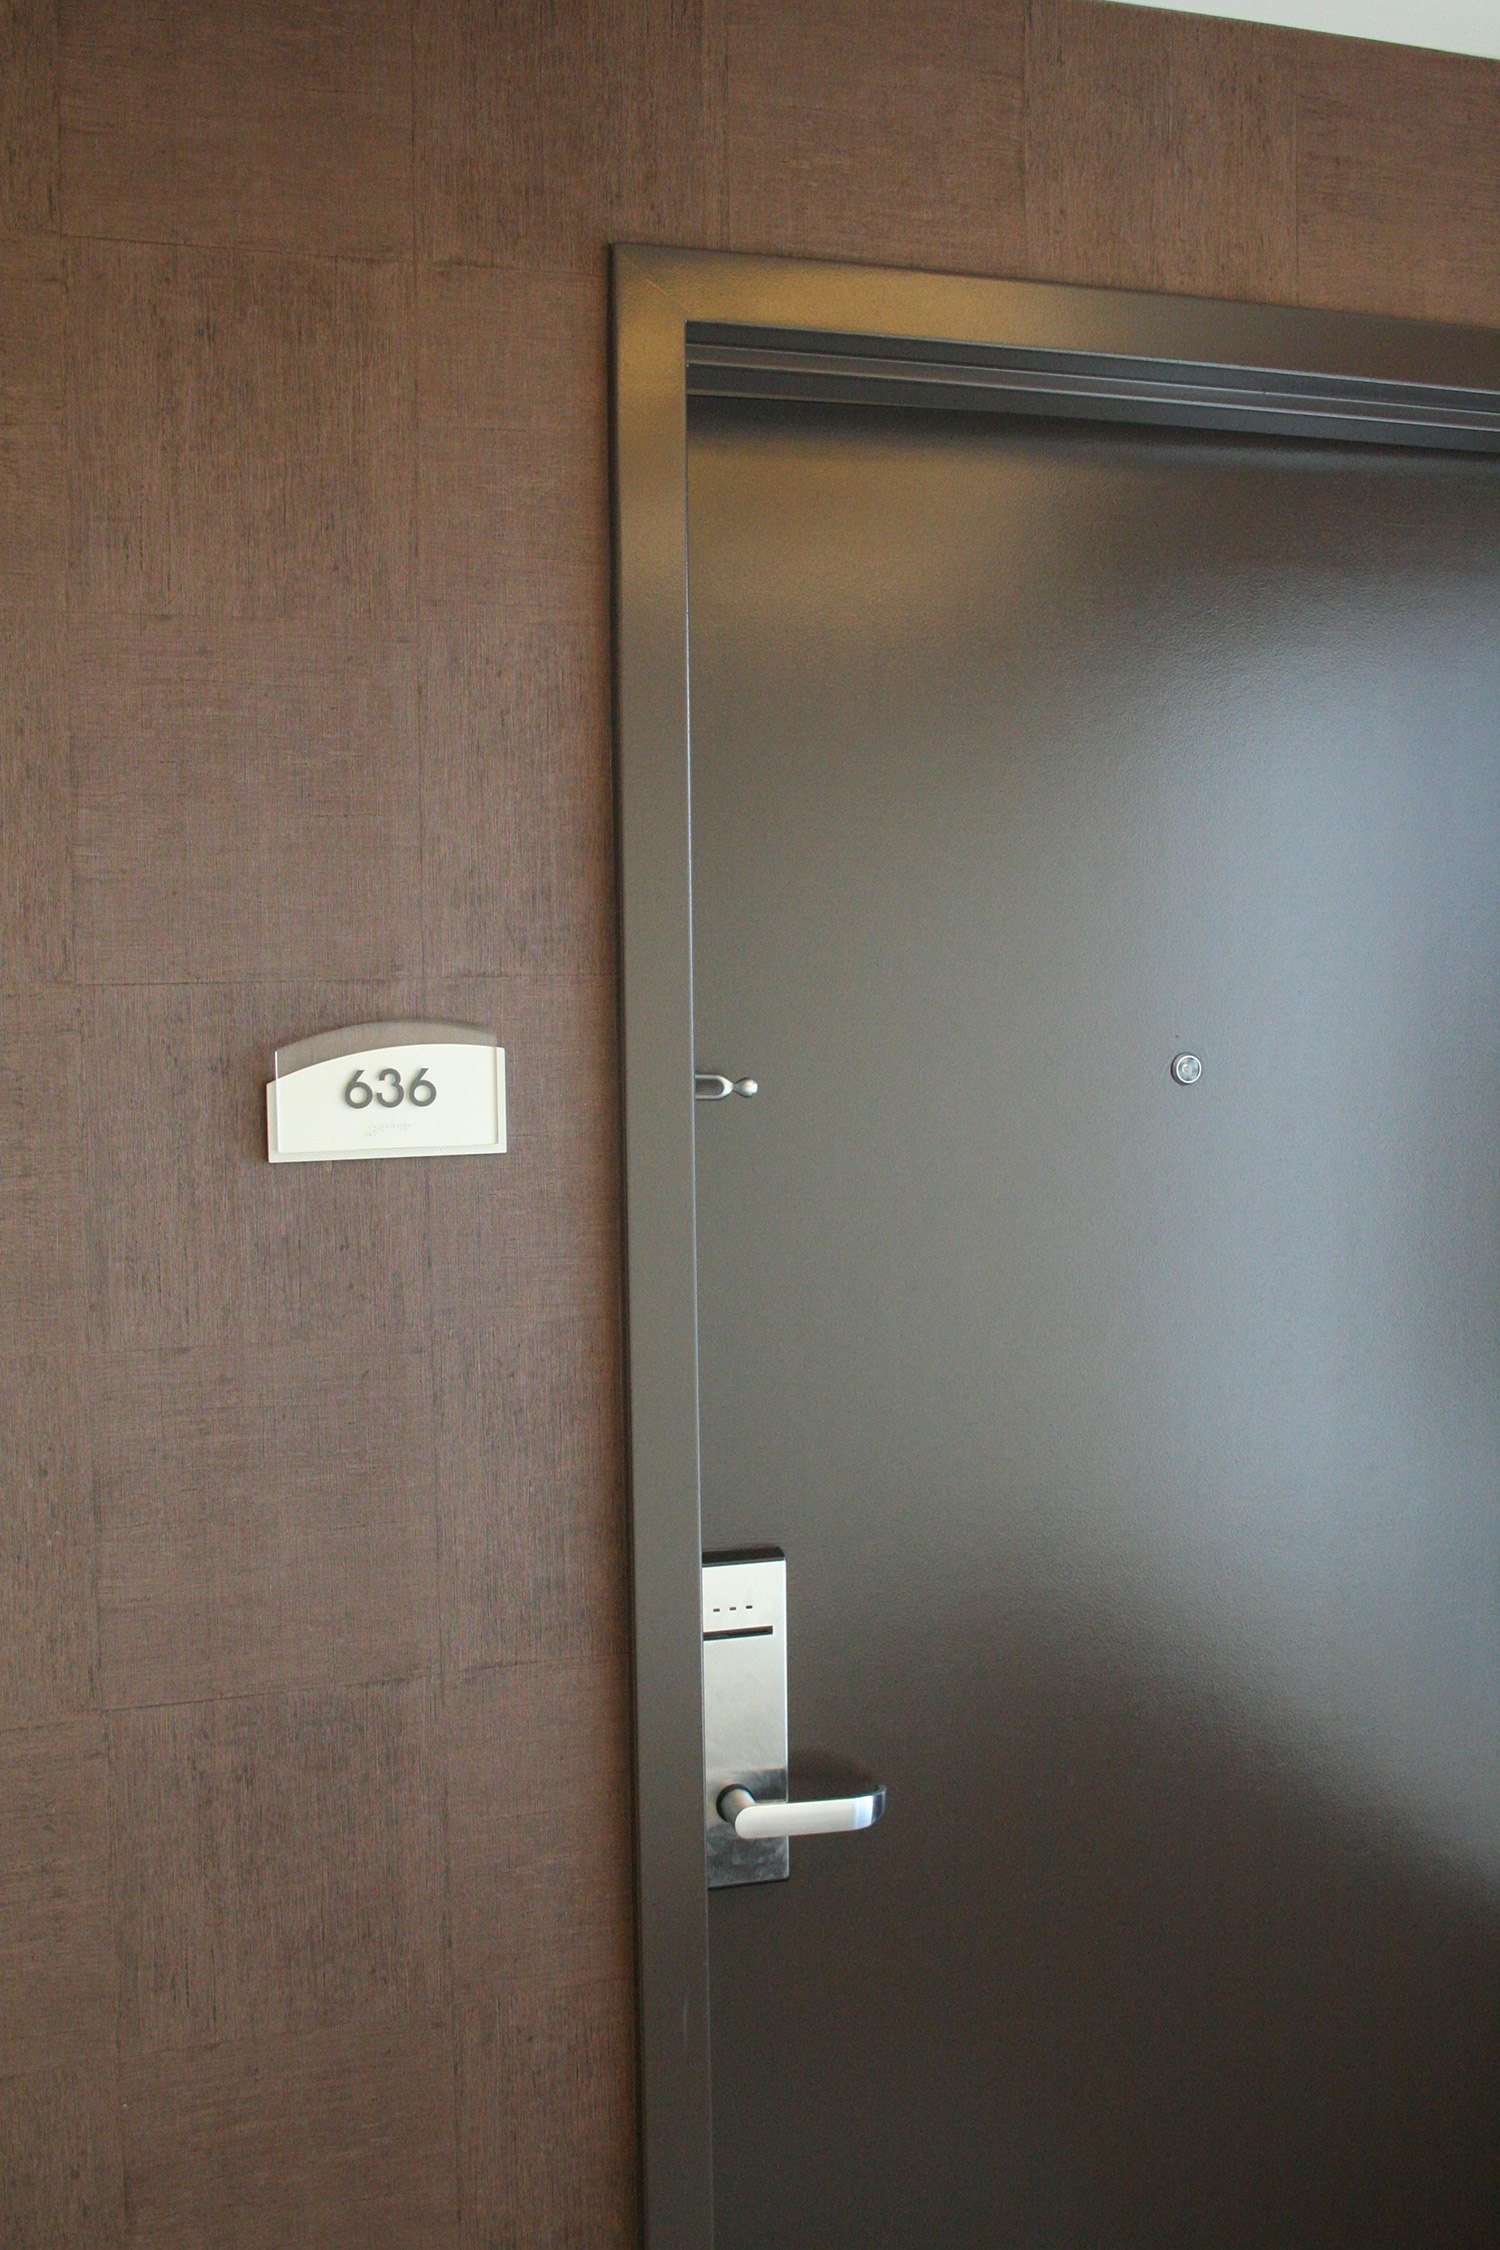 AS_Hilton-Room-Number-Sign-3_12'08